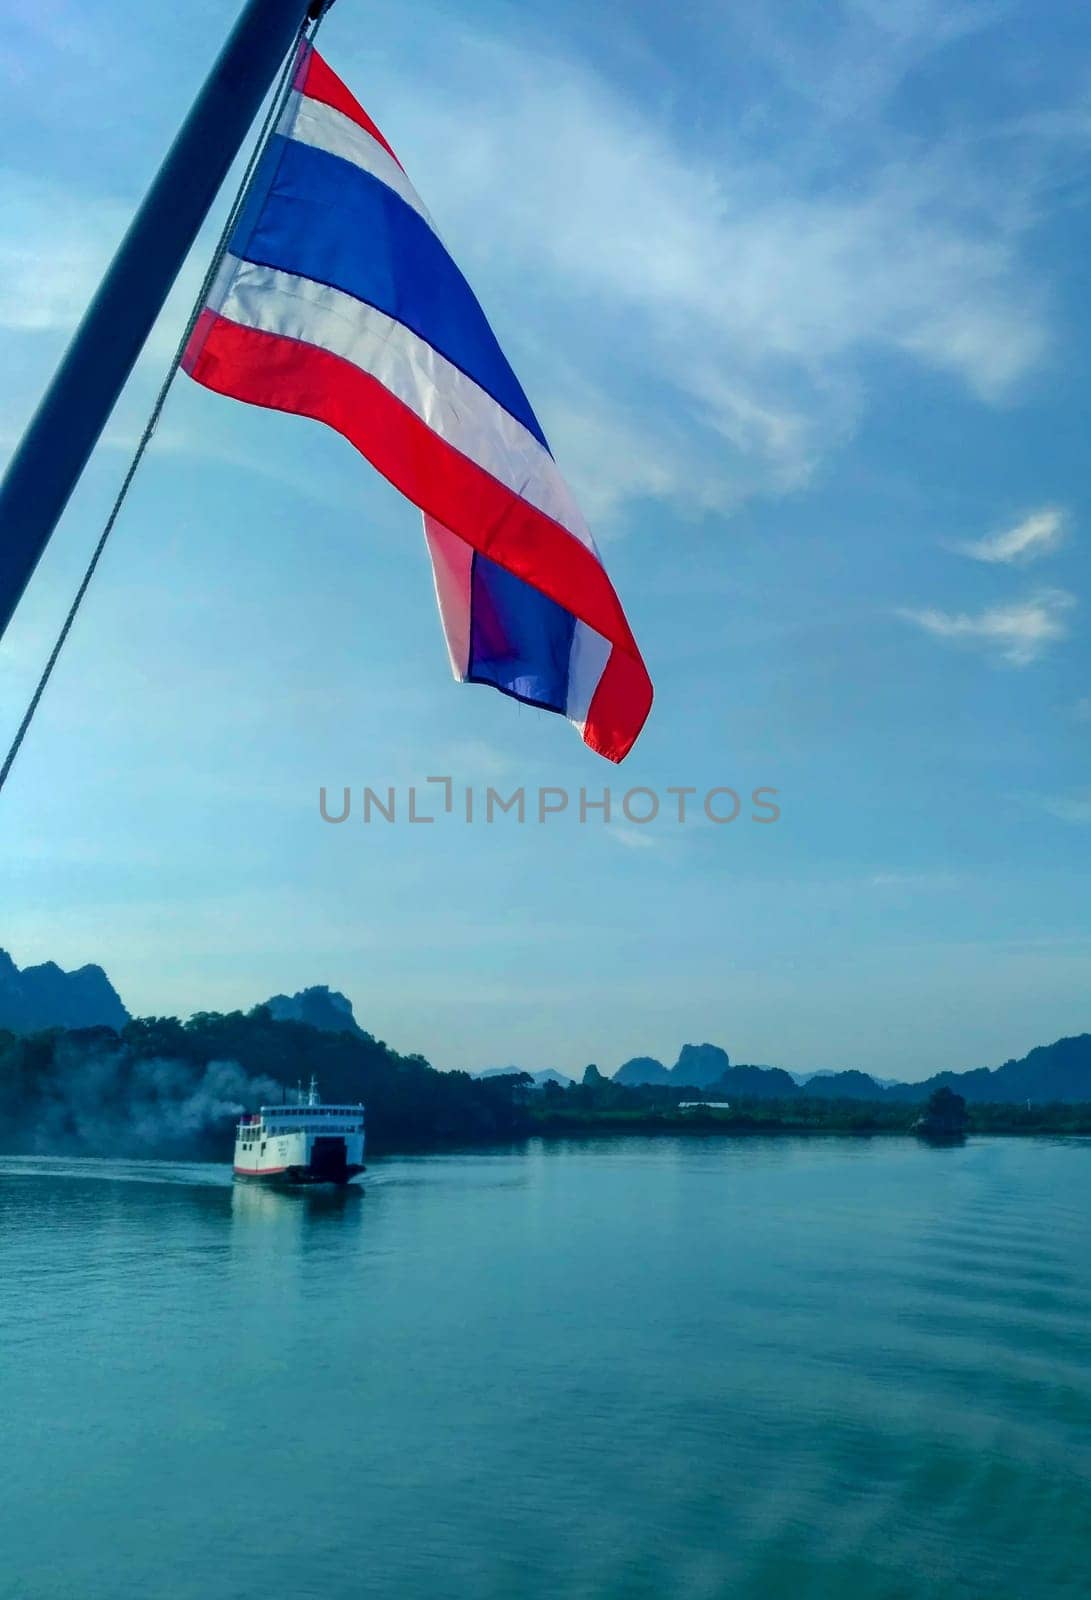 The Kingdom of Thailand flag, sea port, boats, ships, sky, clouds beautiful background, flag on pole waves on wind, state independence symbol, Thai national sign, red, white, blue color stripes banner by Andre1ns